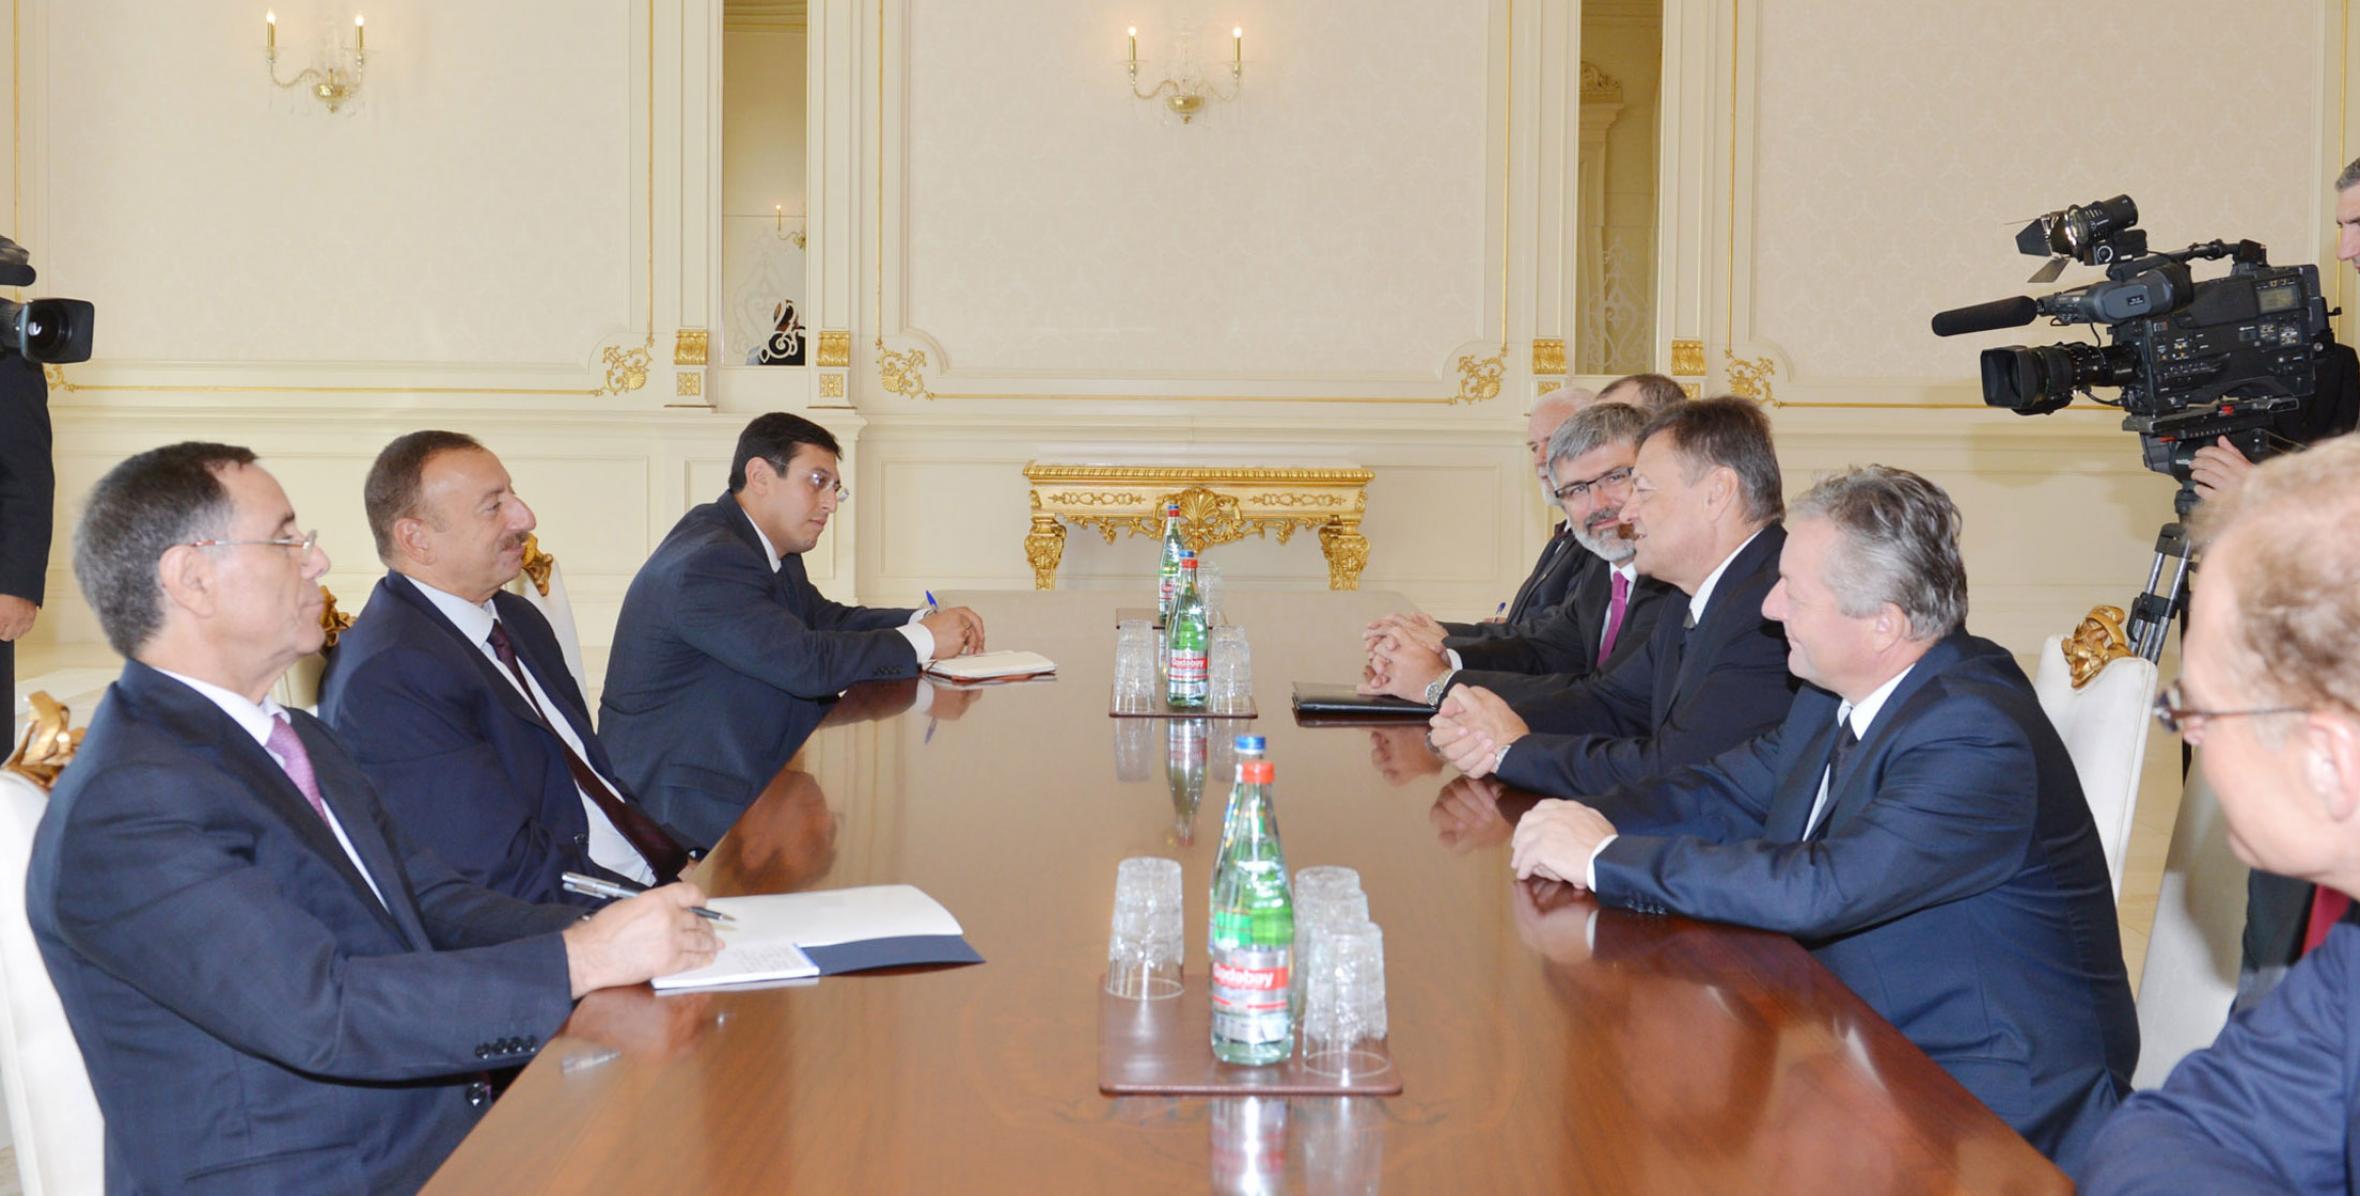 Ilham Aliyev received a delegation led by the Mayor of Ljubljana, which also included the ministers of defense, economic development and technology of Slovenia